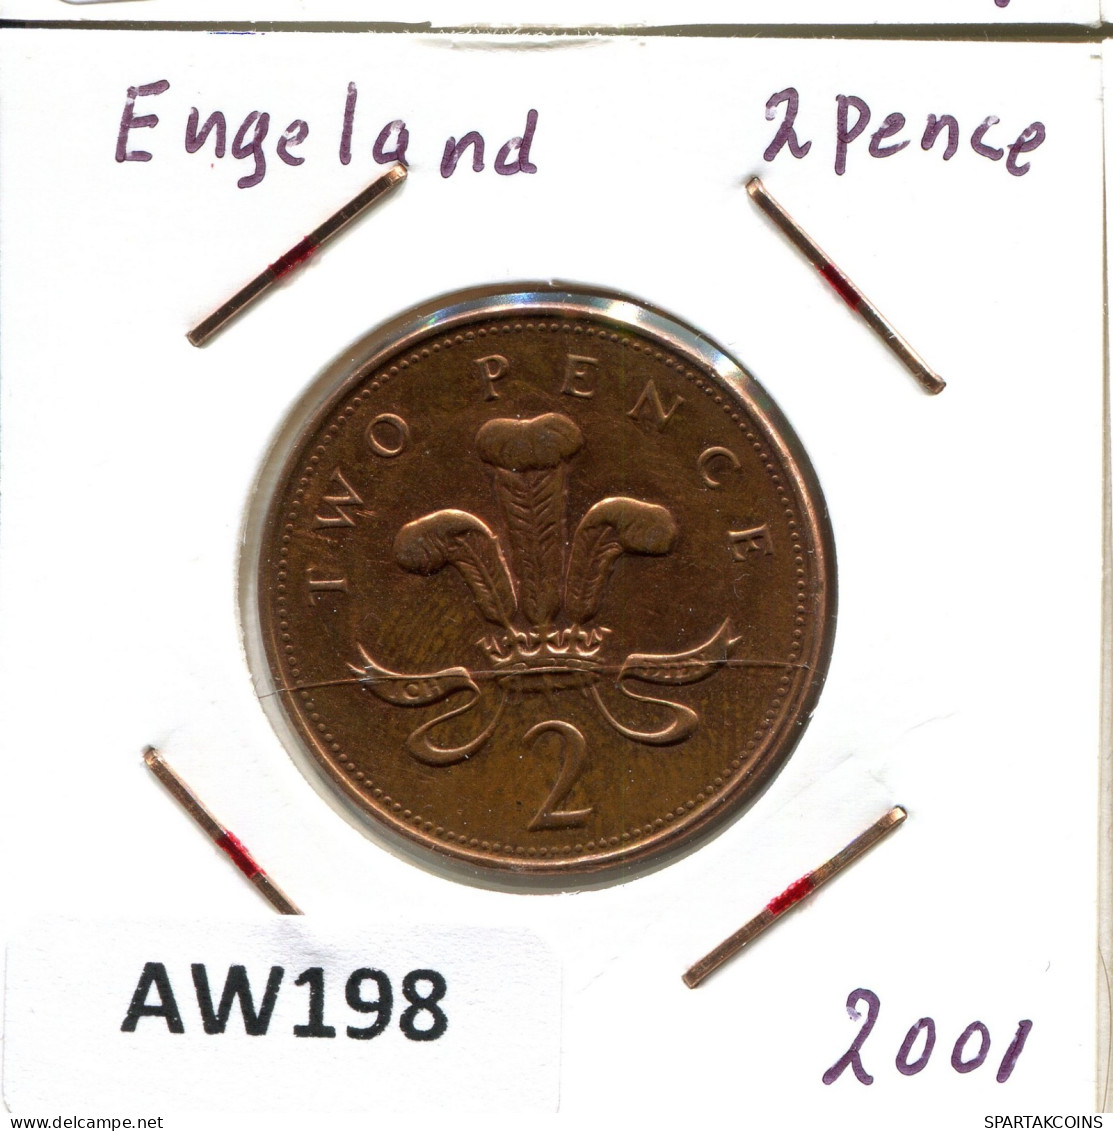 2 PENCE 2001 UK GROßBRITANNIEN GREAT BRITAIN Münze #AW198.D.A - 2 Pence & 2 New Pence